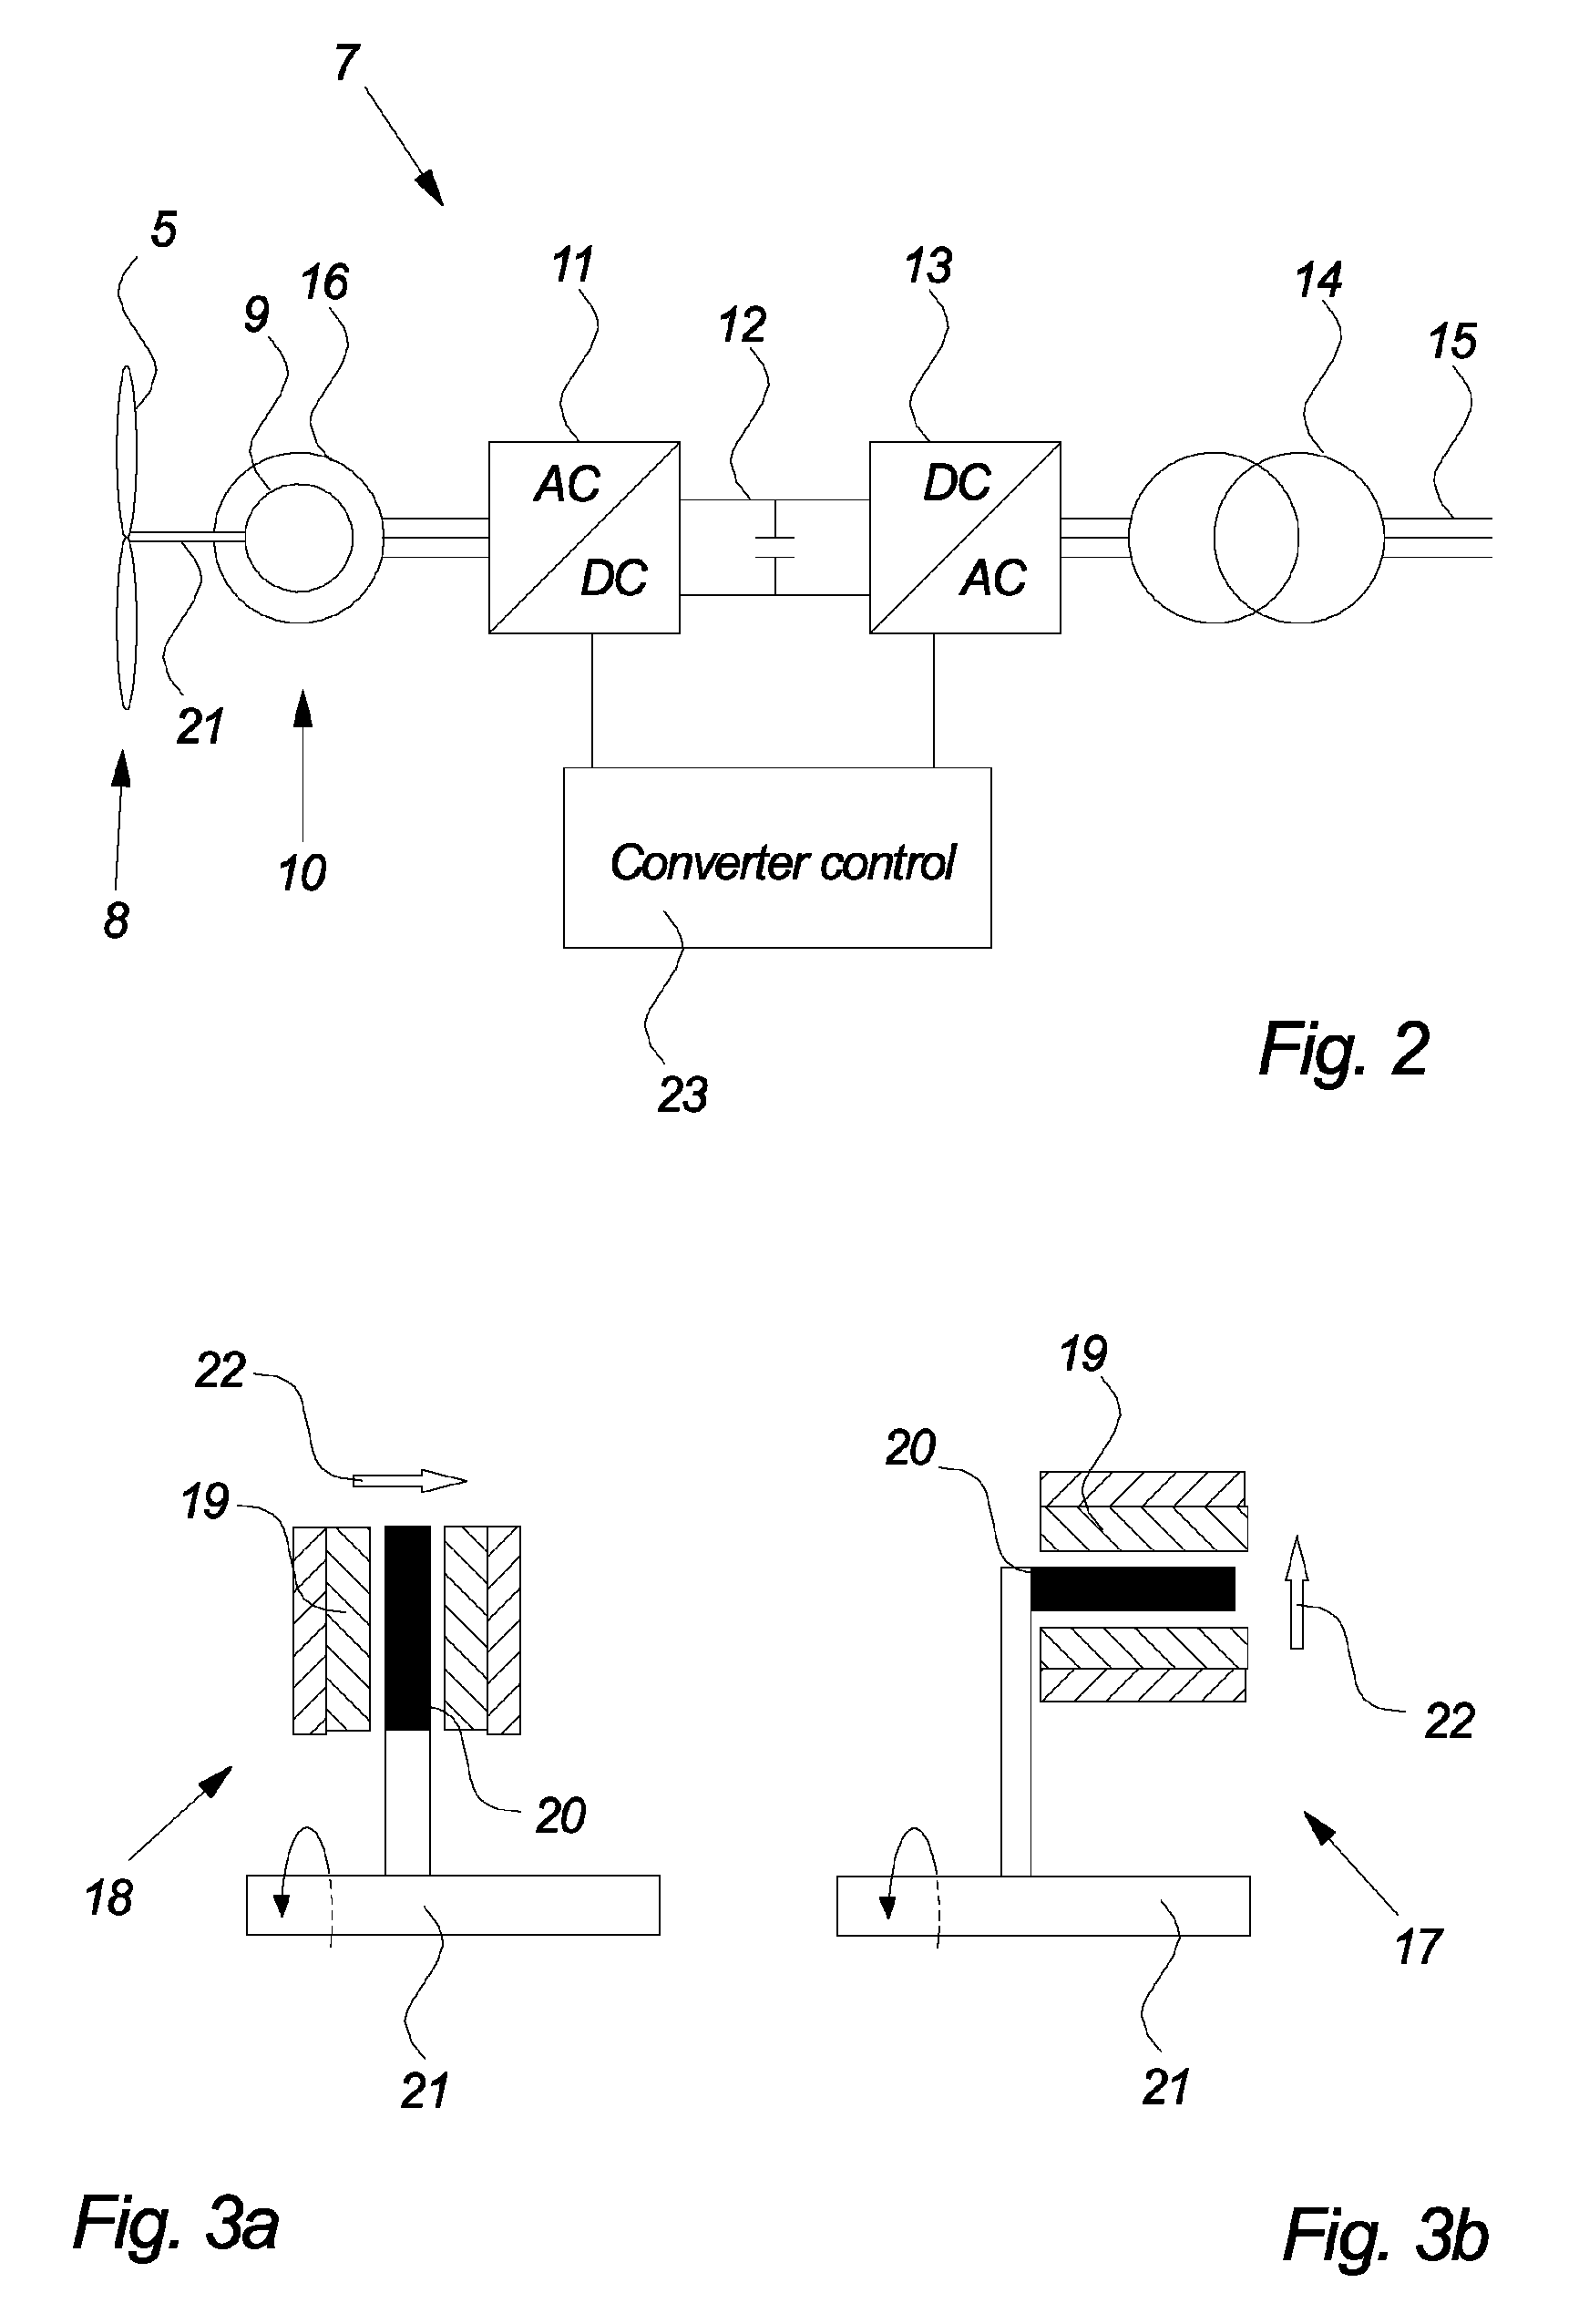 Method for estimating the magnetization level of one or more permanent magnets established in one or more permanent magnet rotors of a wind turbine generator and wind turbine